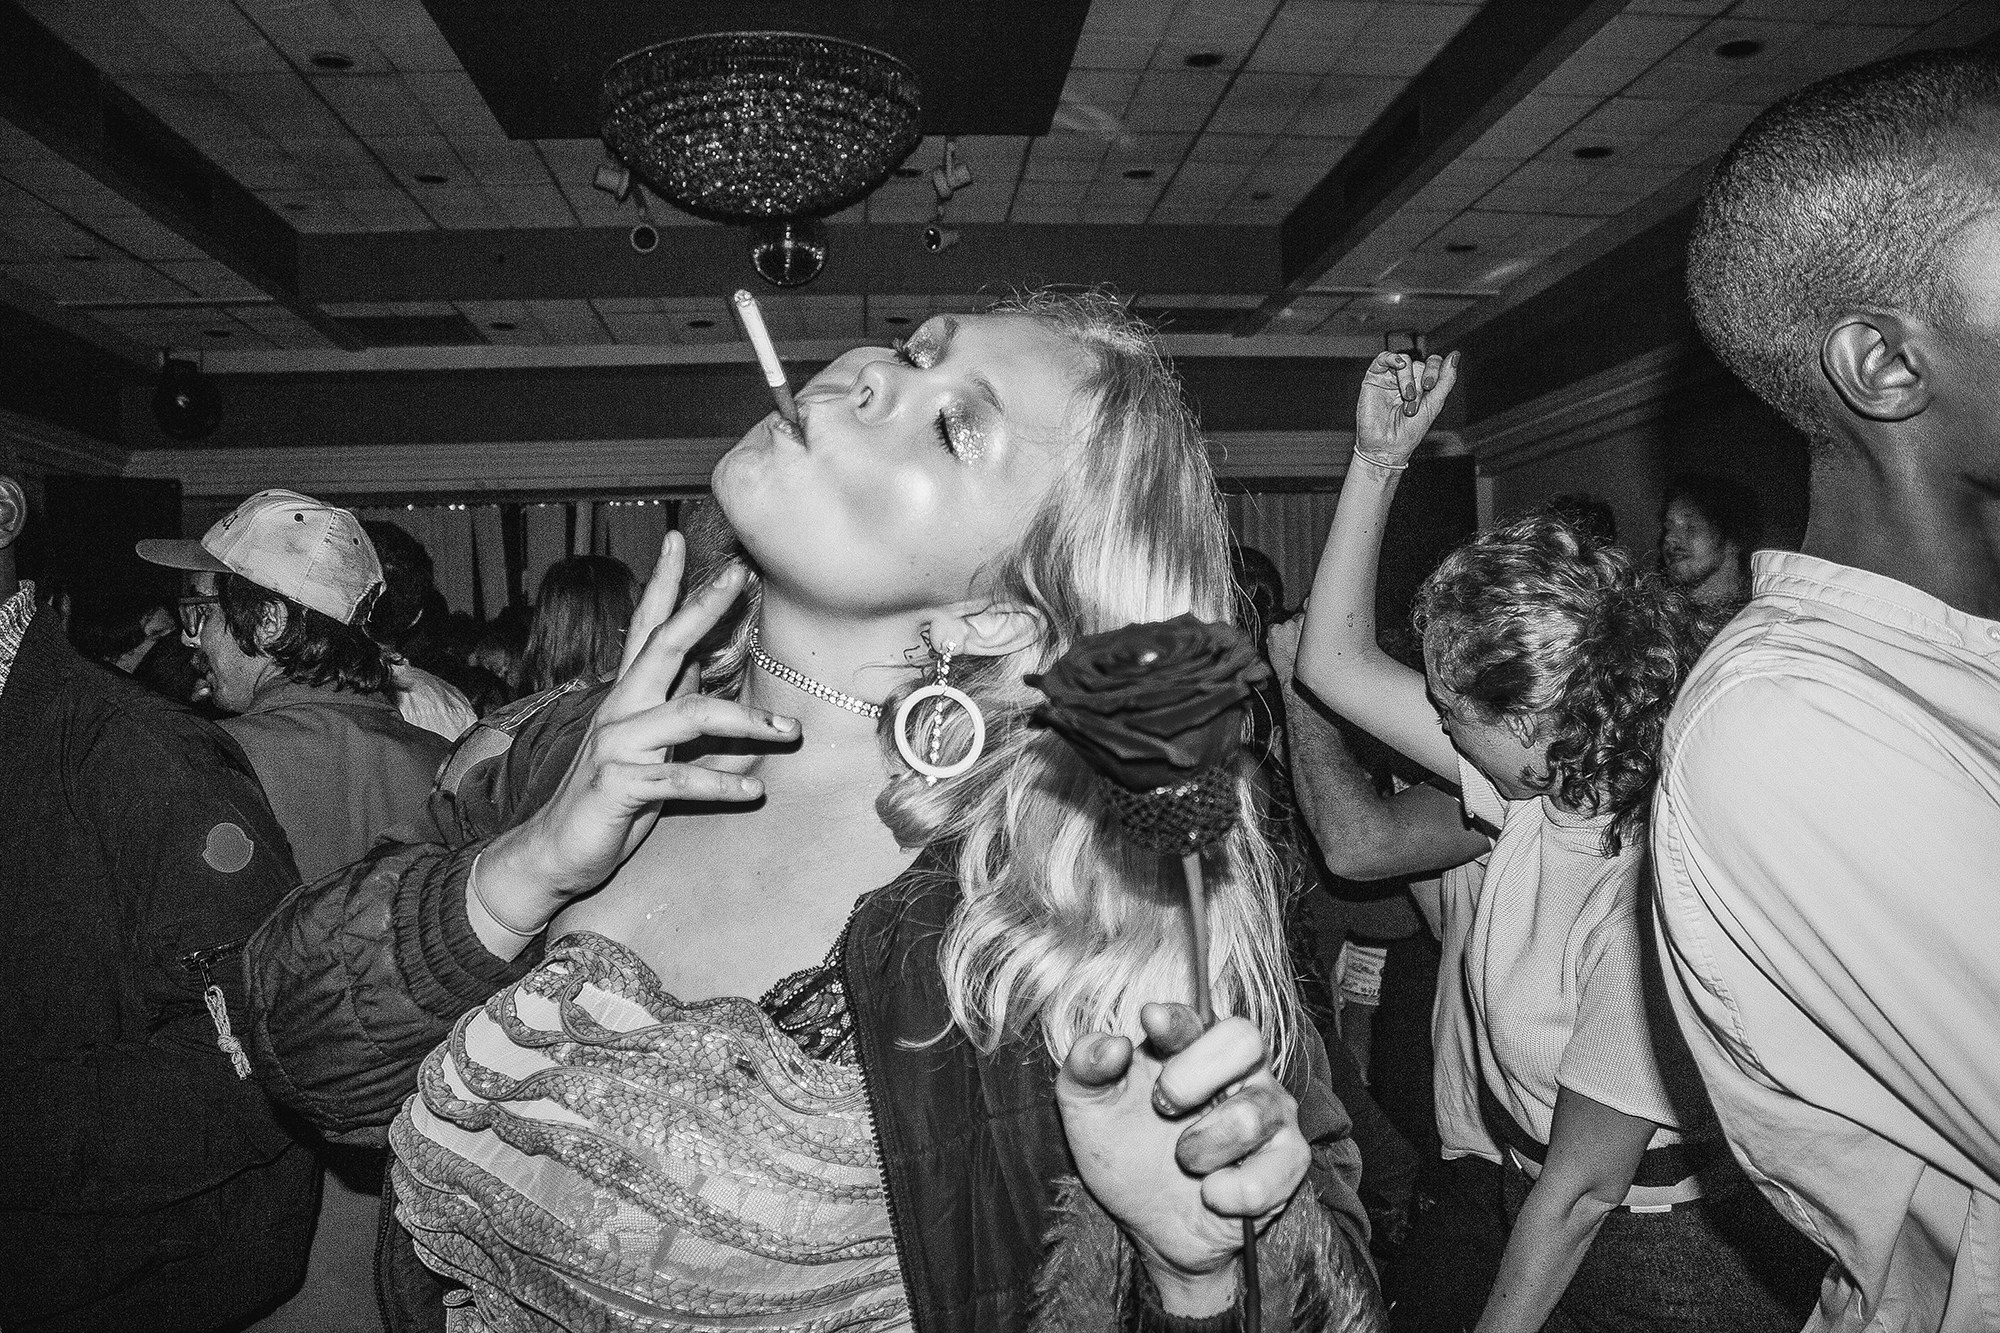 A woman smoking a cigarette while dancing on a dance floor